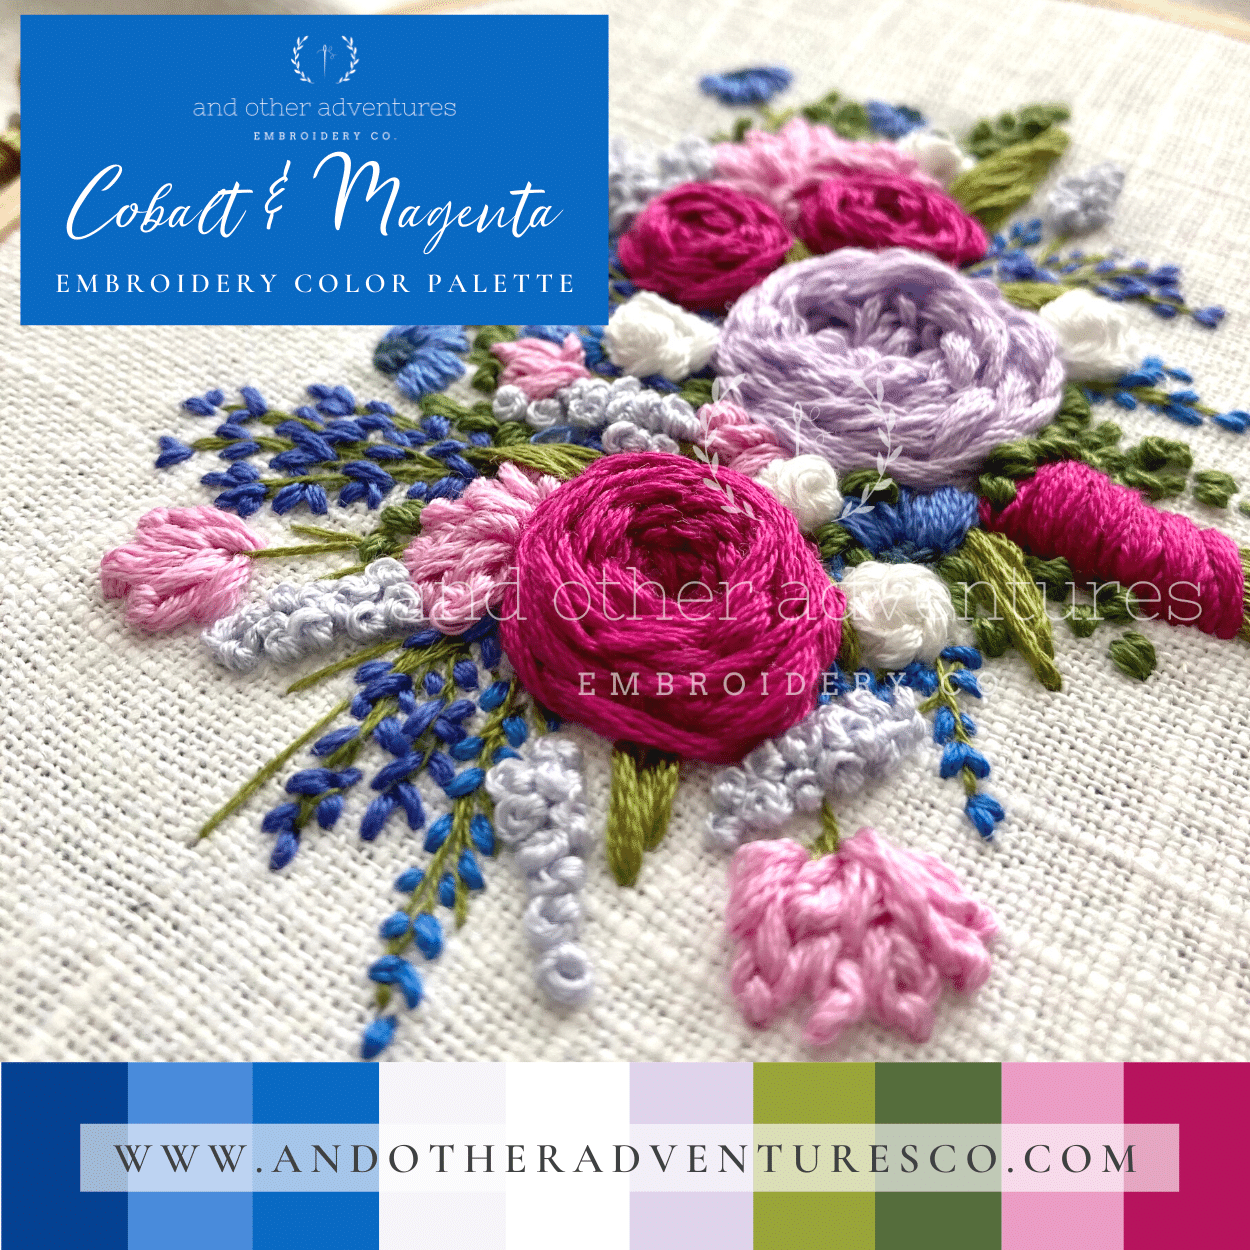 Cobalt & Magenta Hand Embroidery Color Palette by And Other Adventures Embroidery Co